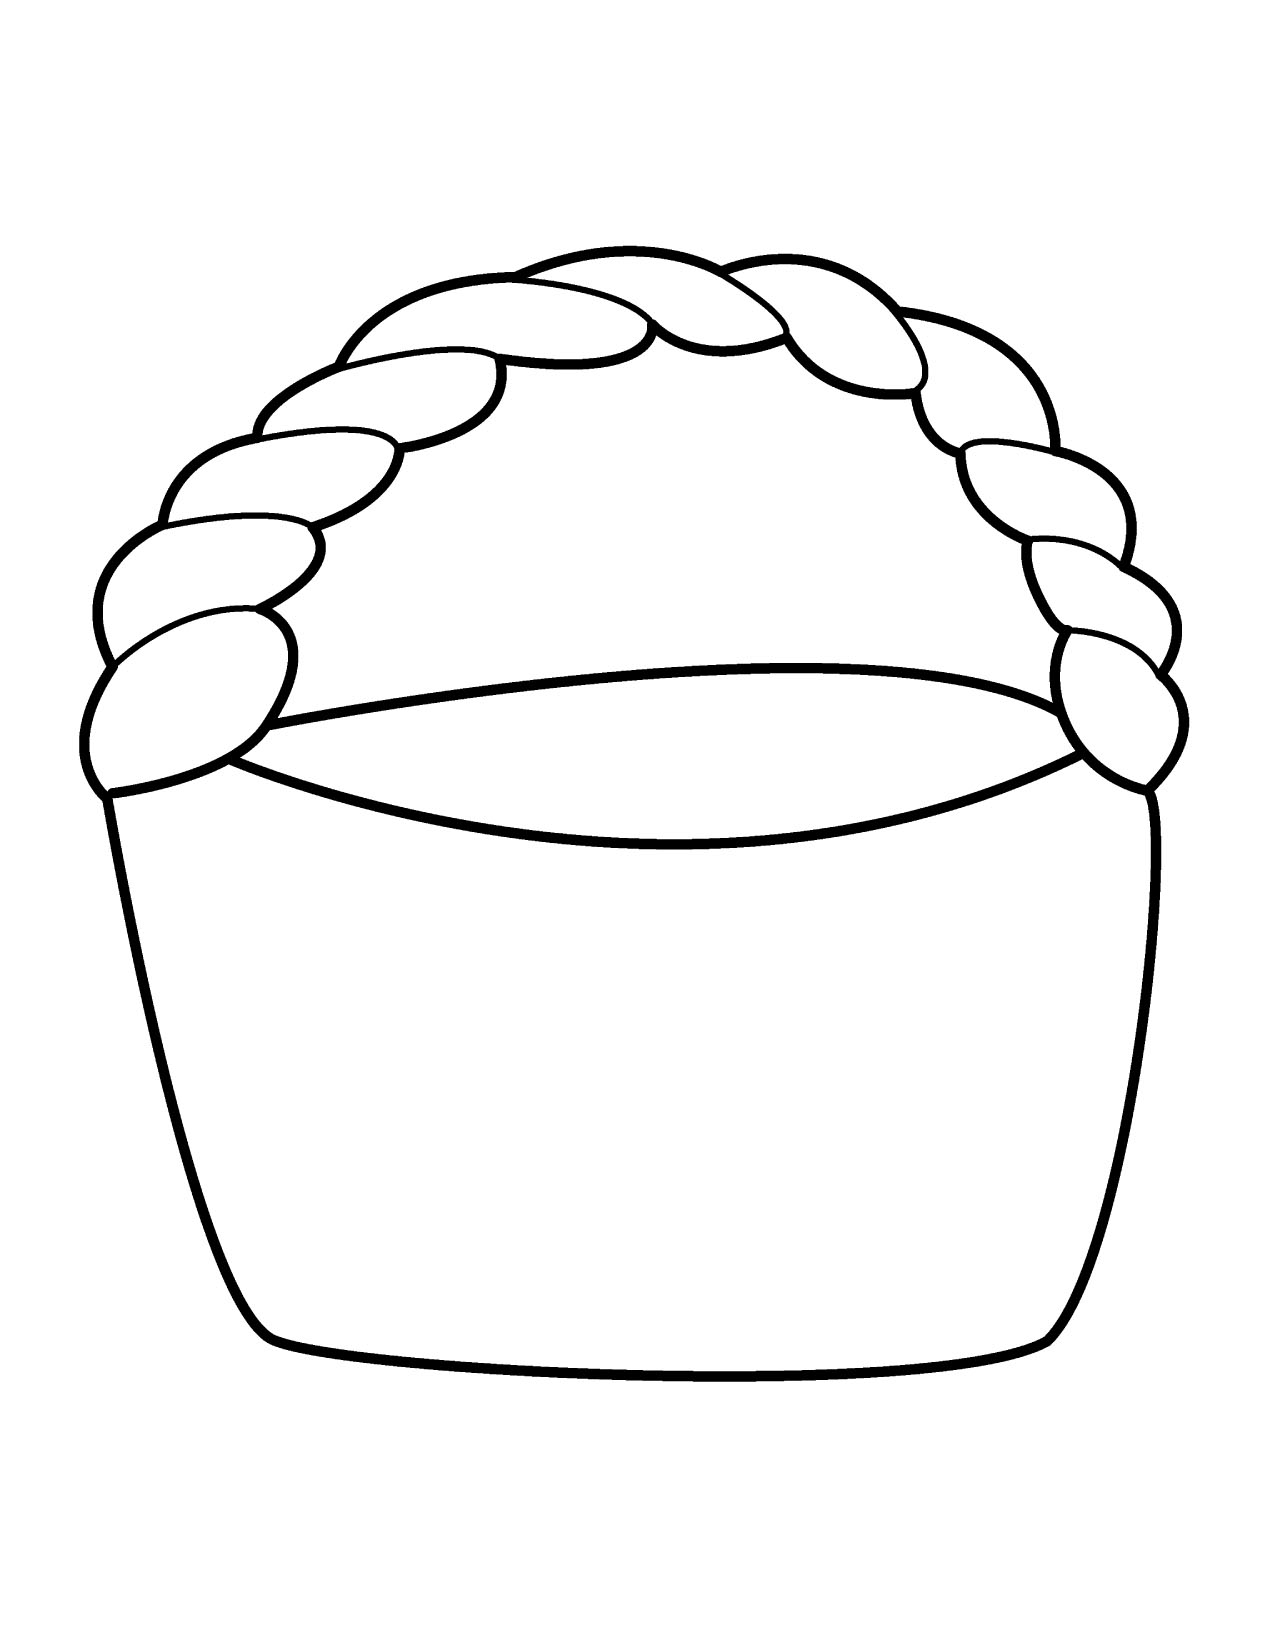 Bread Basket Clipart Black And White | Clipart Panda - Free ...